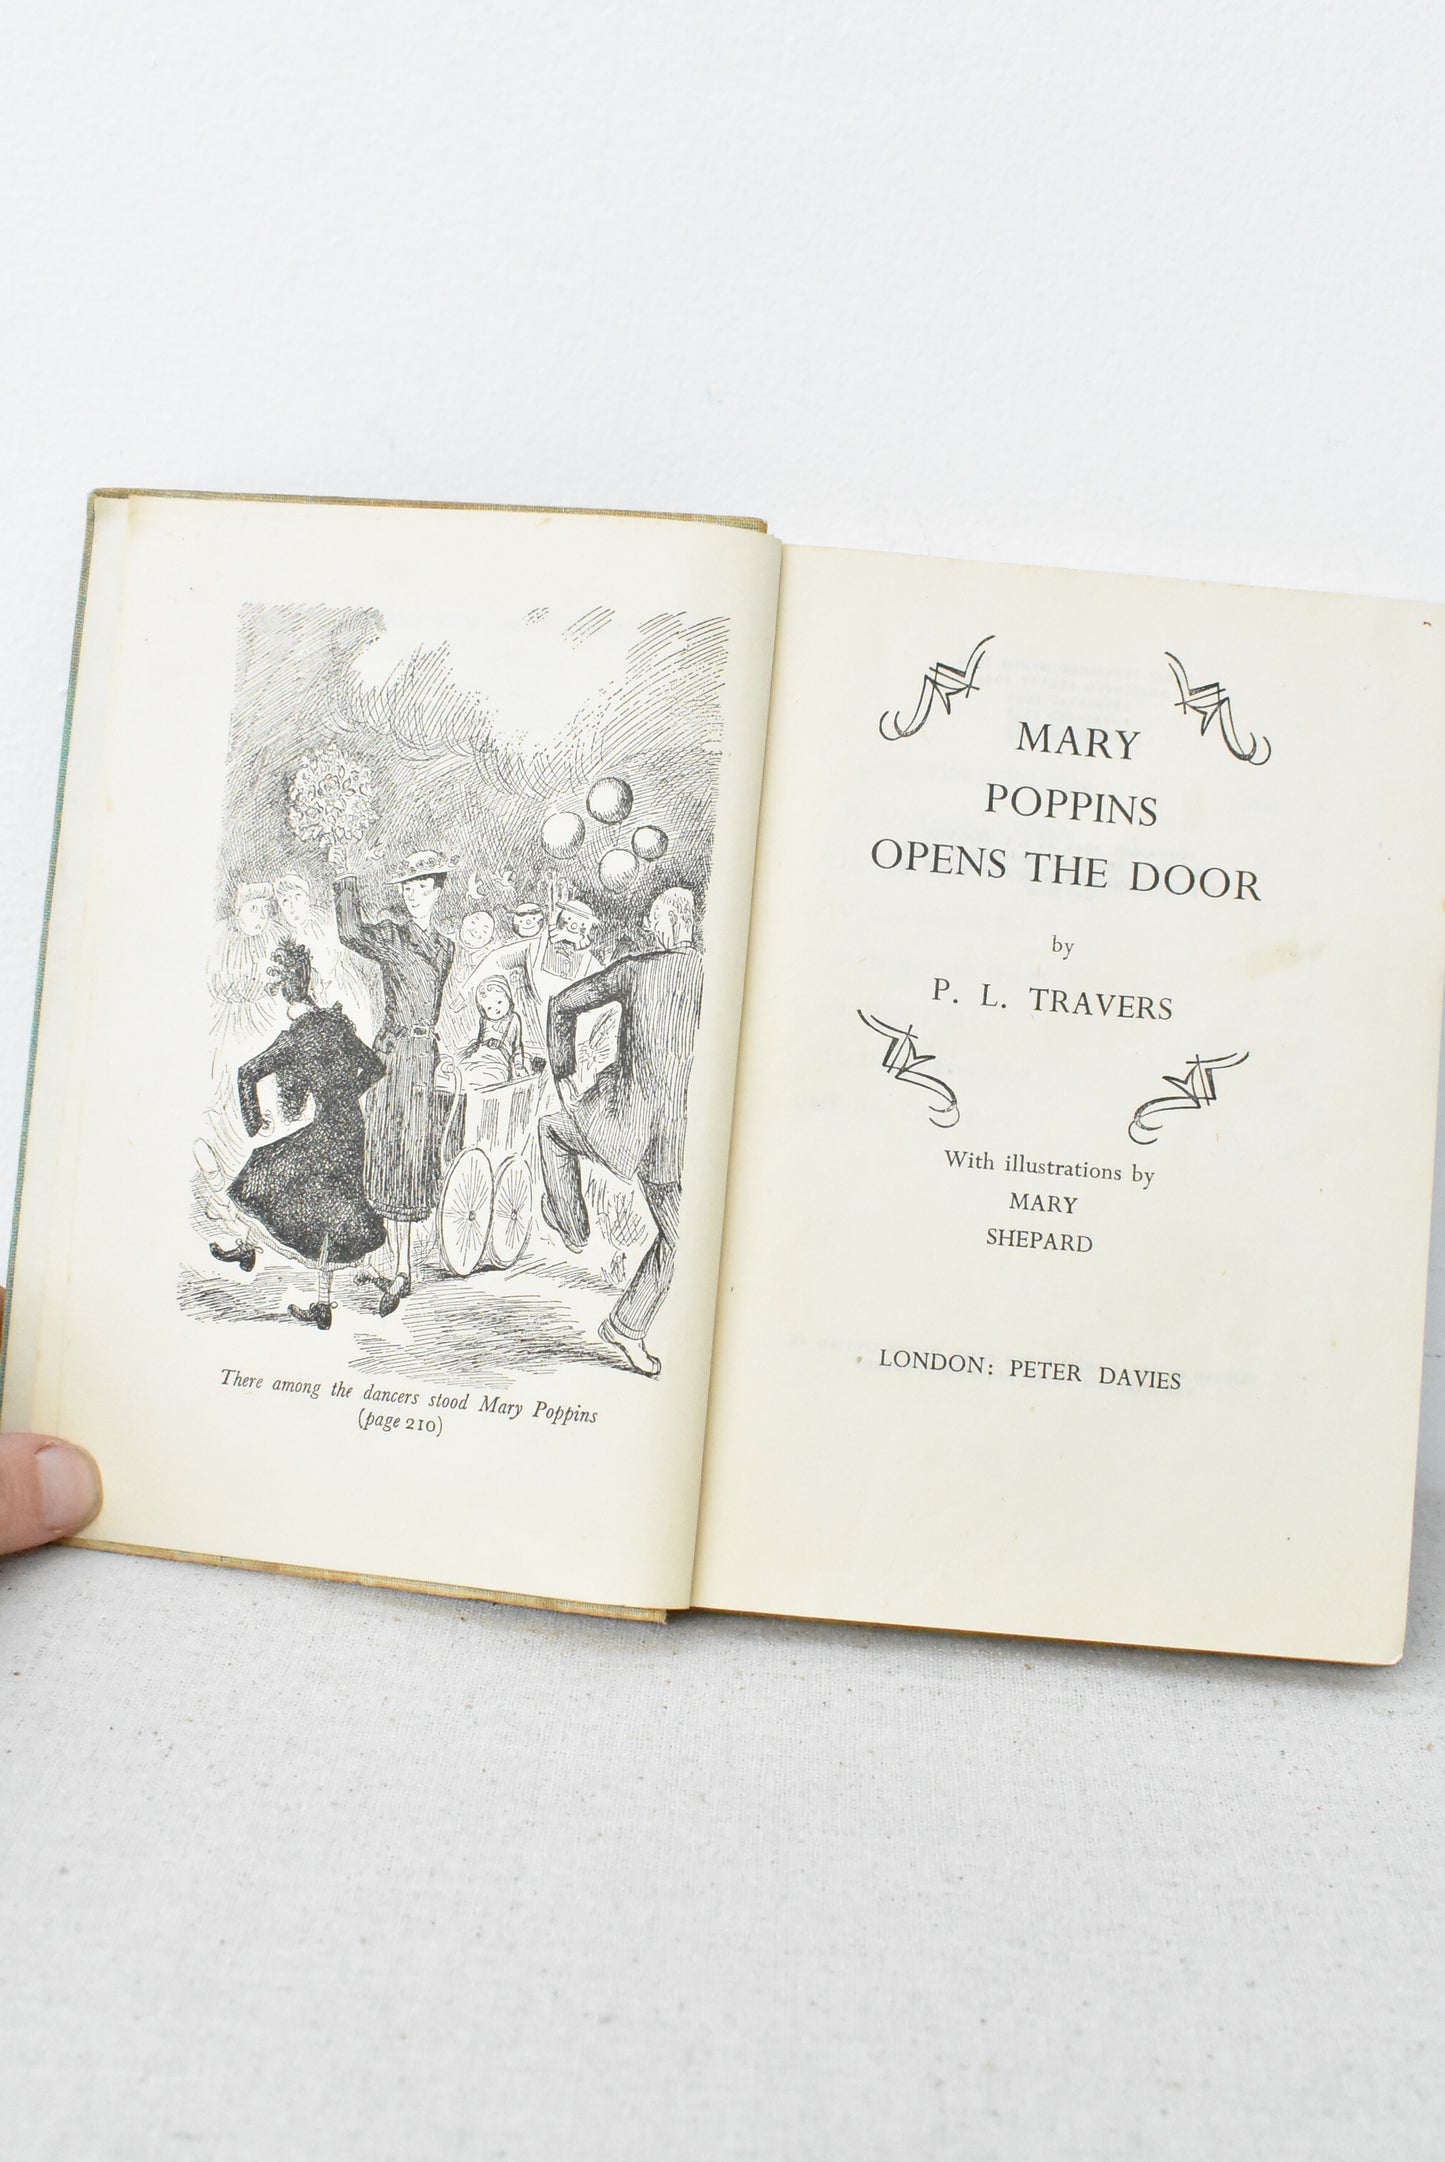 Vintage 1940's "Mary Poppins Opens the Door" by P. L. Travers